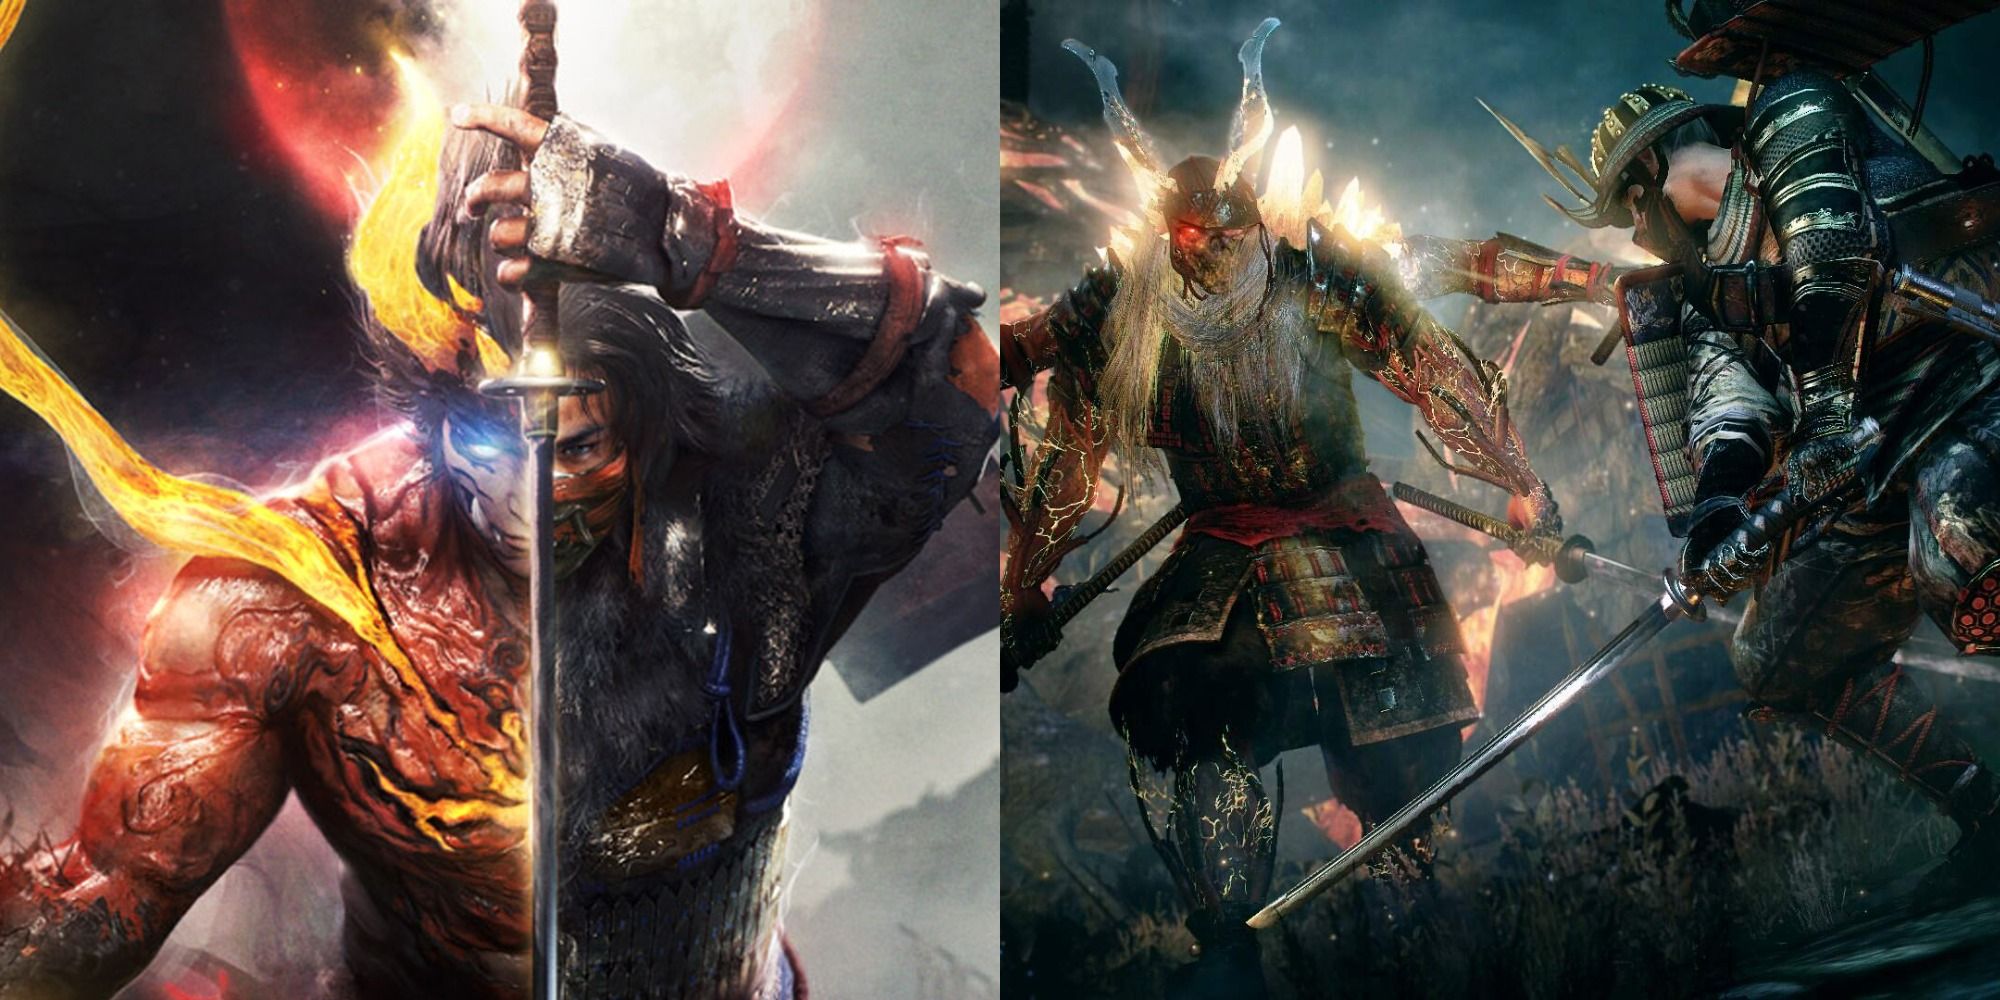 Nioh 2 cover art and combat